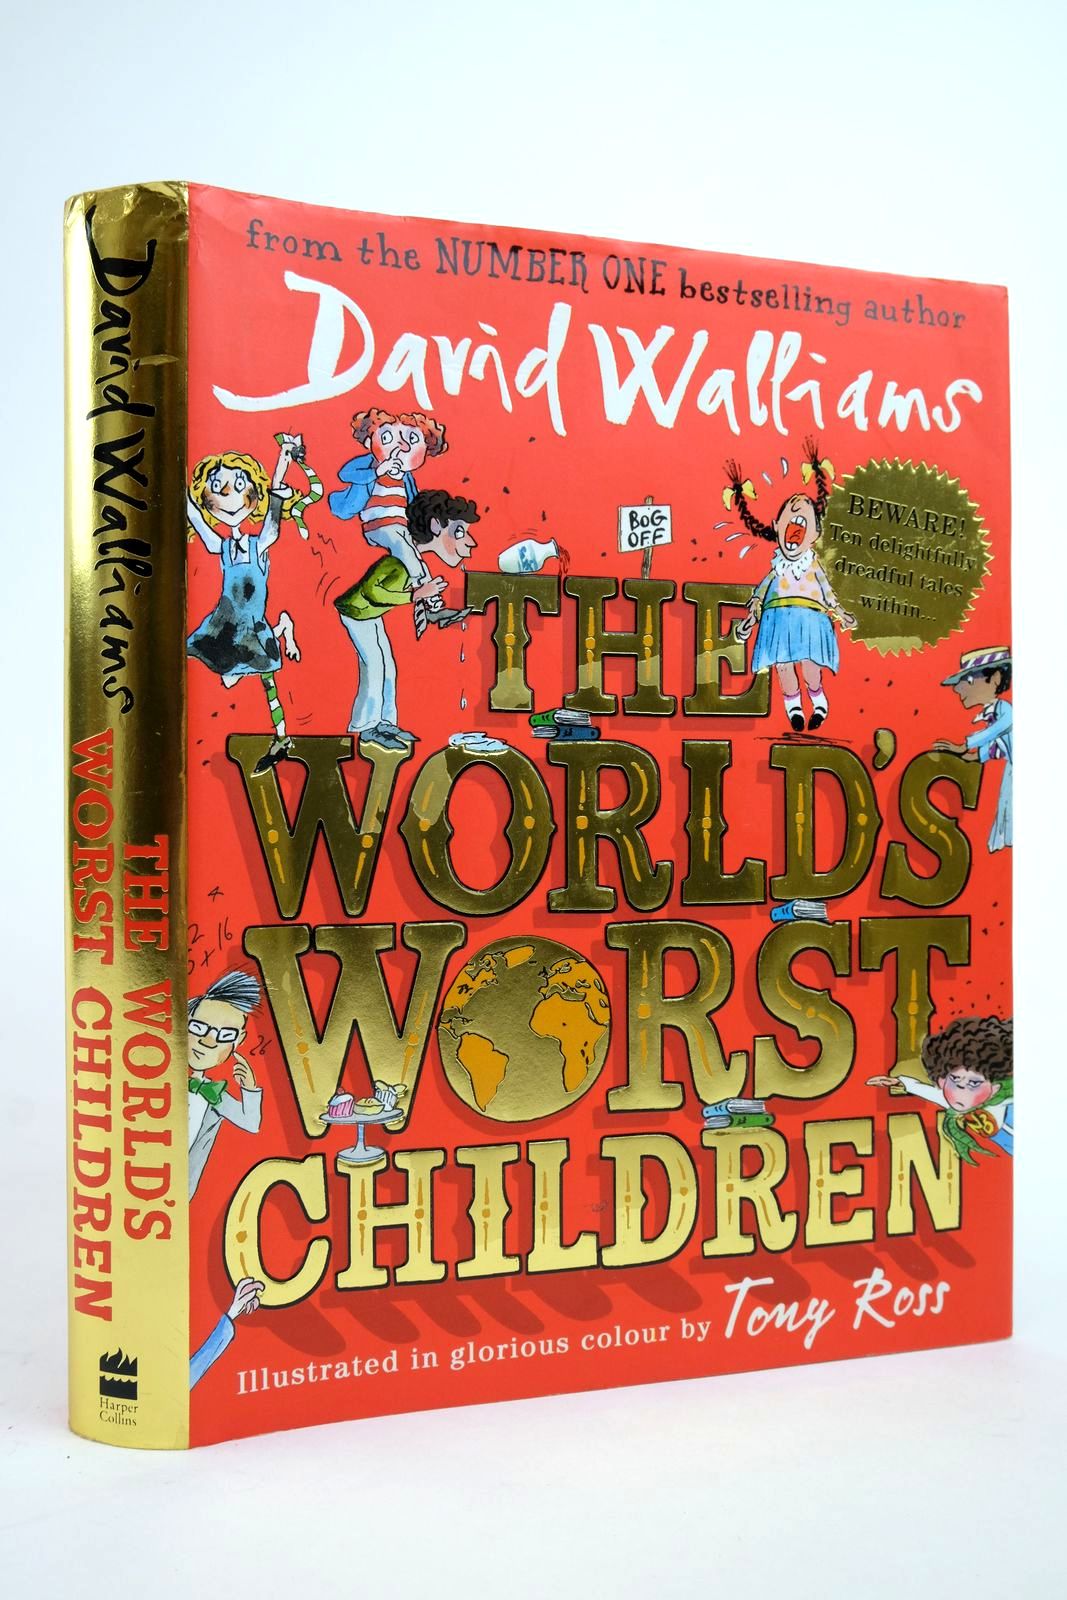 Photo of THE WORLD'S WORST CHILDREN written by Walliams, David illustrated by Ross, Tony published by Harper Collins Childrens Books (STOCK CODE: 2135606)  for sale by Stella & Rose's Books